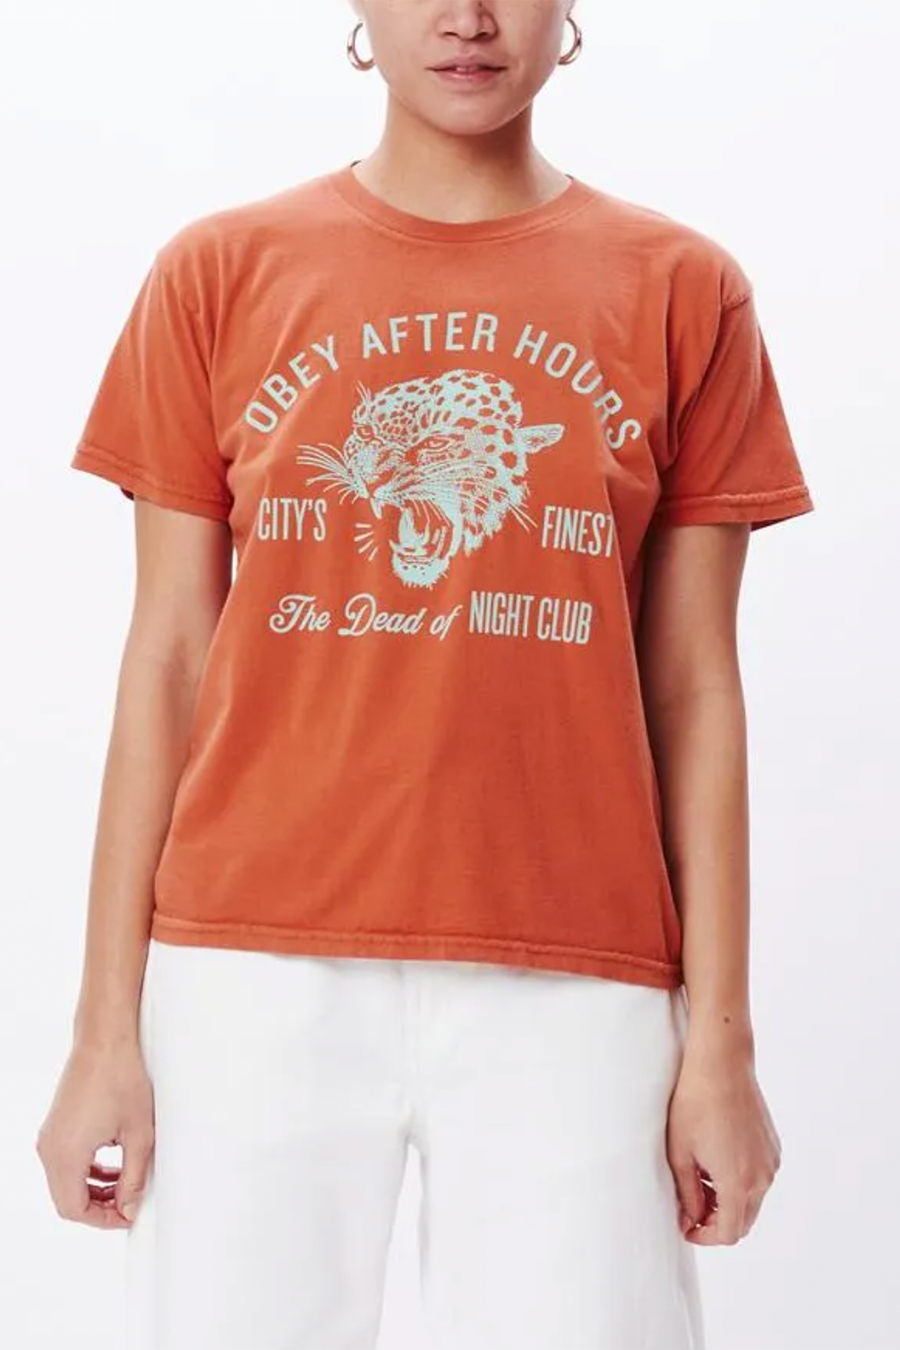 After Hours Organic Tee | Copper Coin - Main Image Number 1 of 1